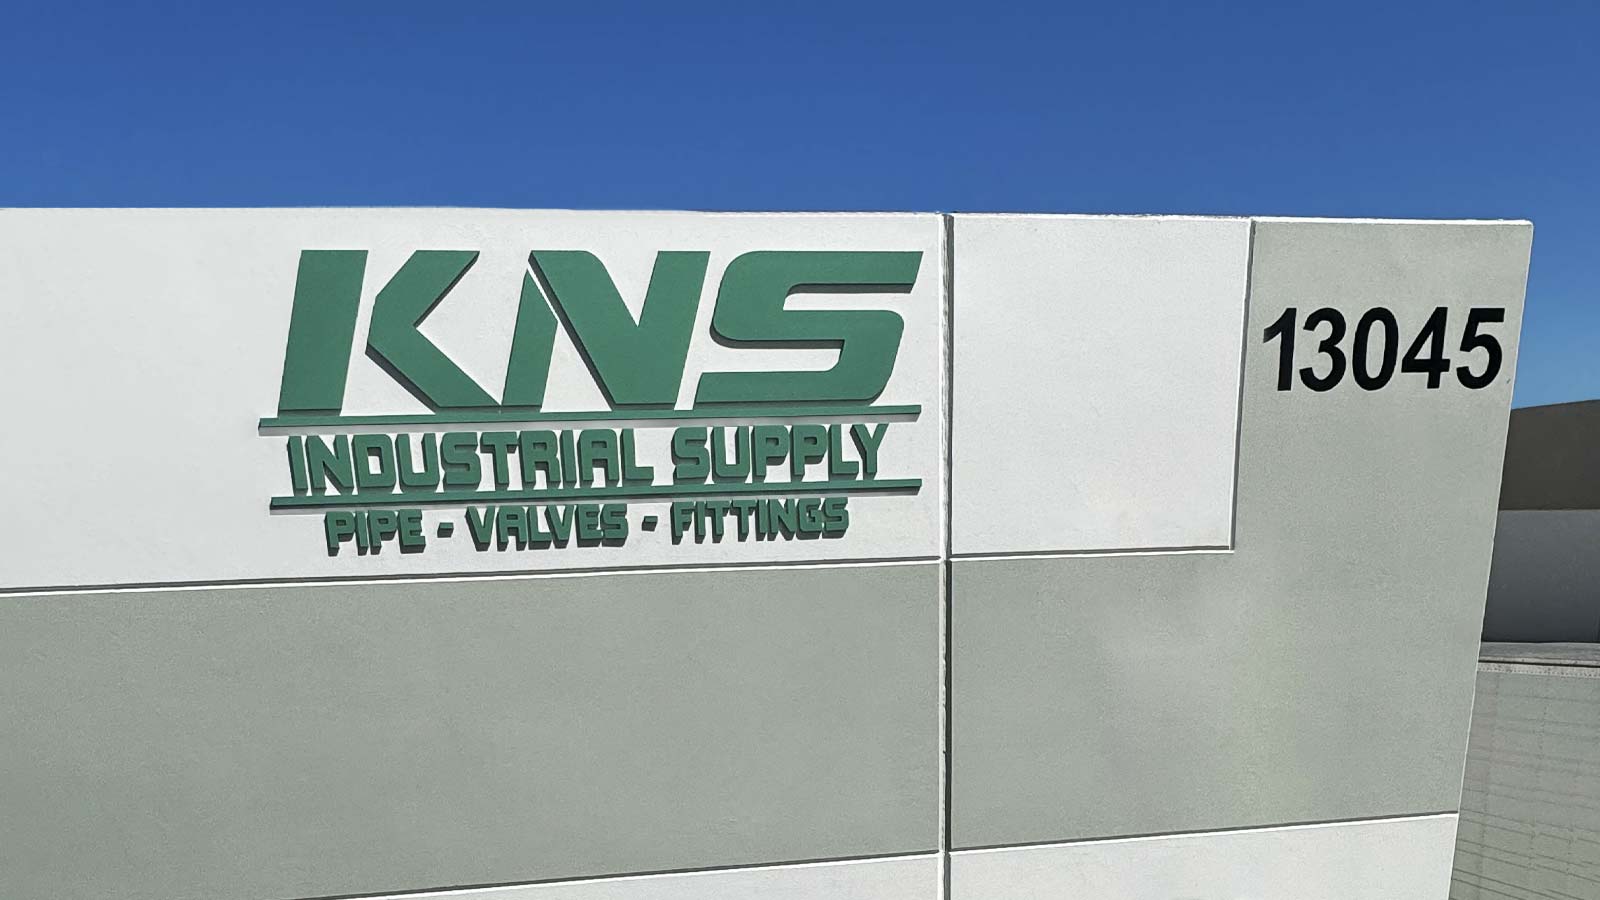 kns pvc sign installed on the outdoor wall